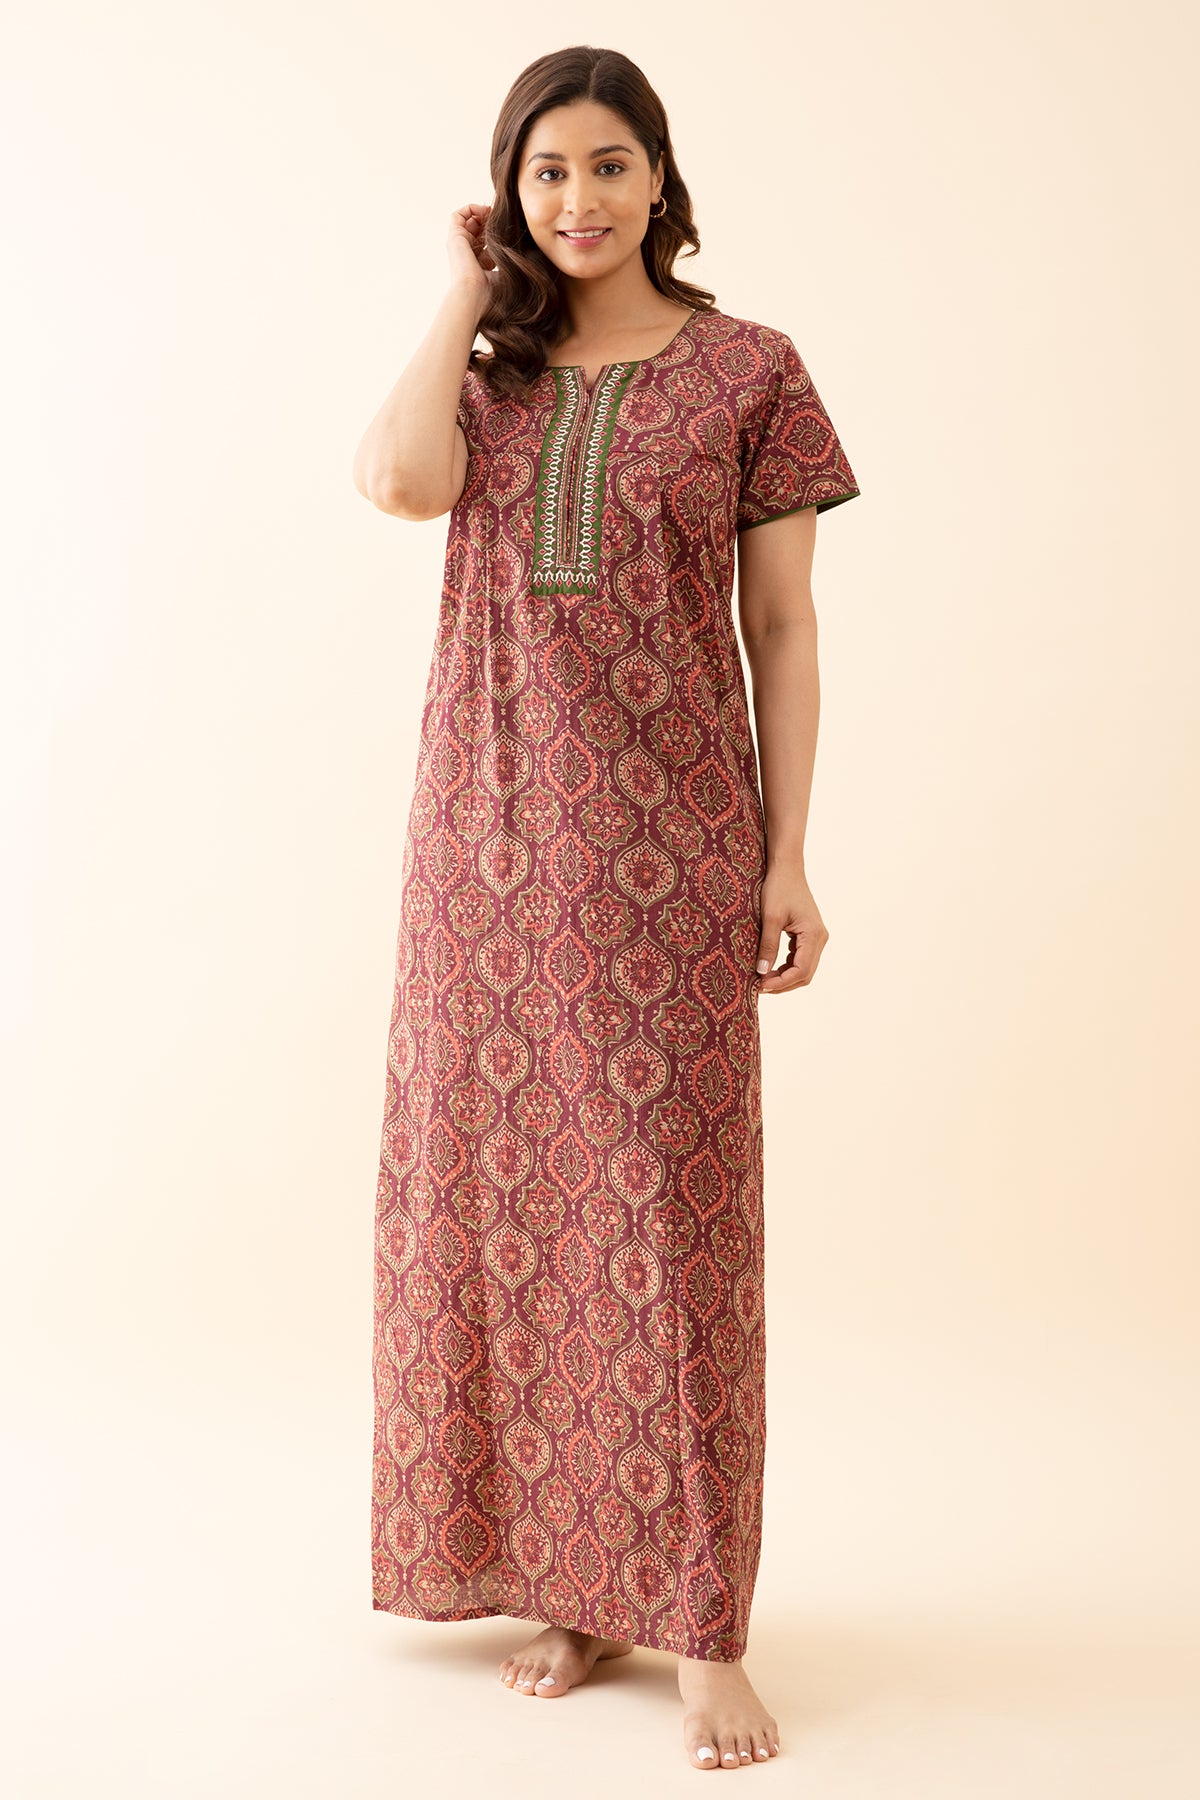 Floral Printed Nighty with Contrast Embroidered Yoke - Maroon